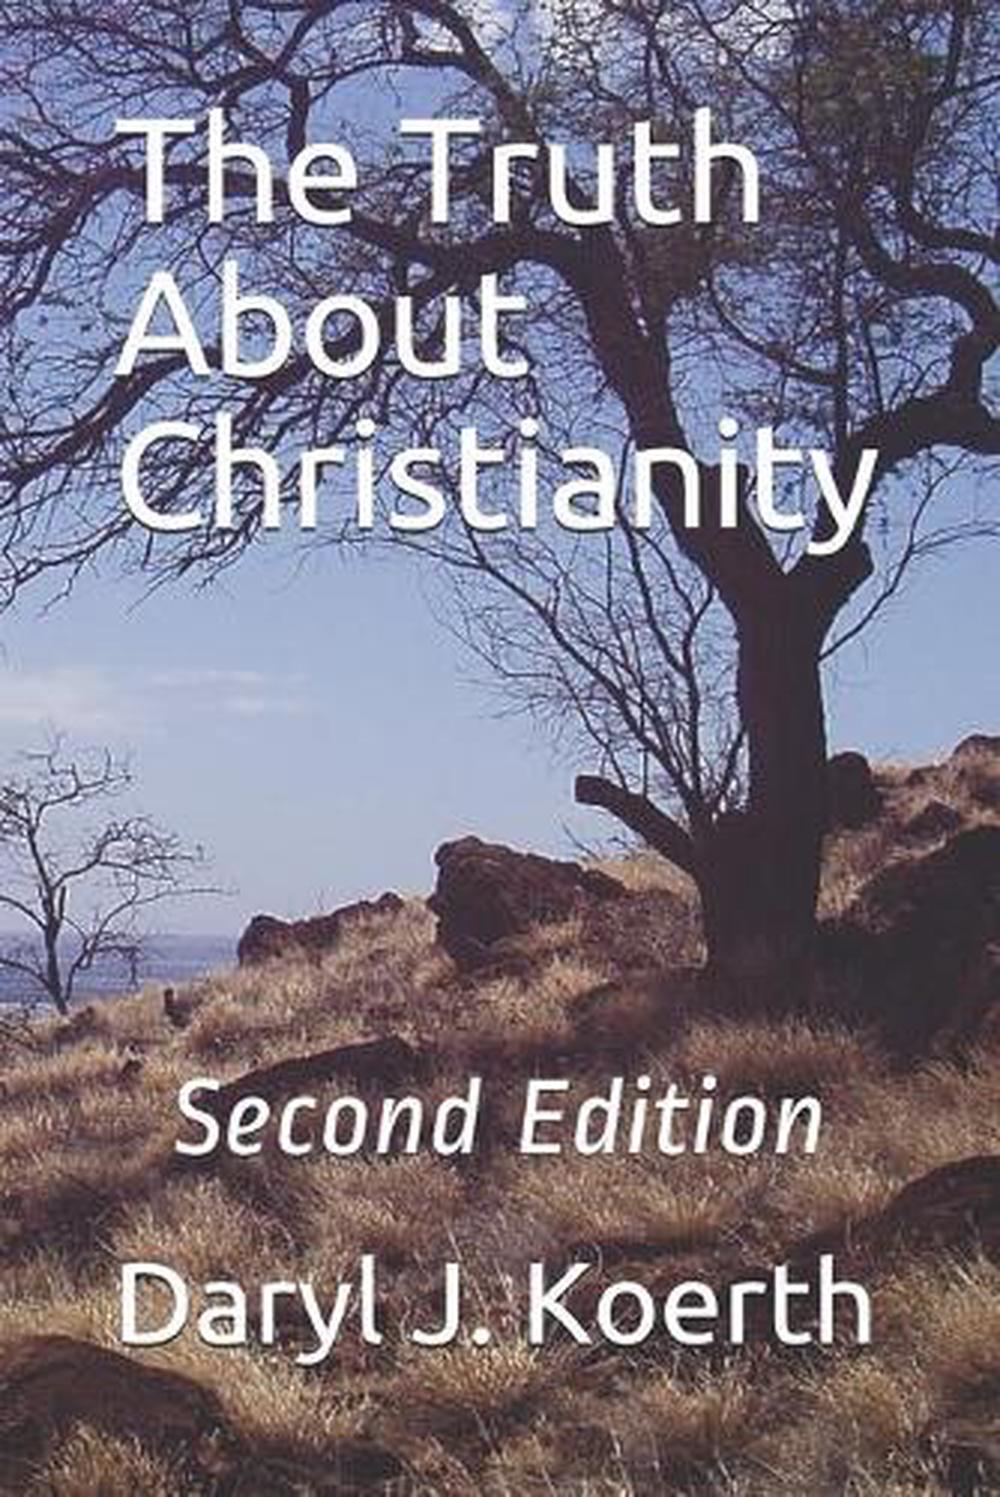 The Truth about Christianity Second Edition by Daryl J. Koerth